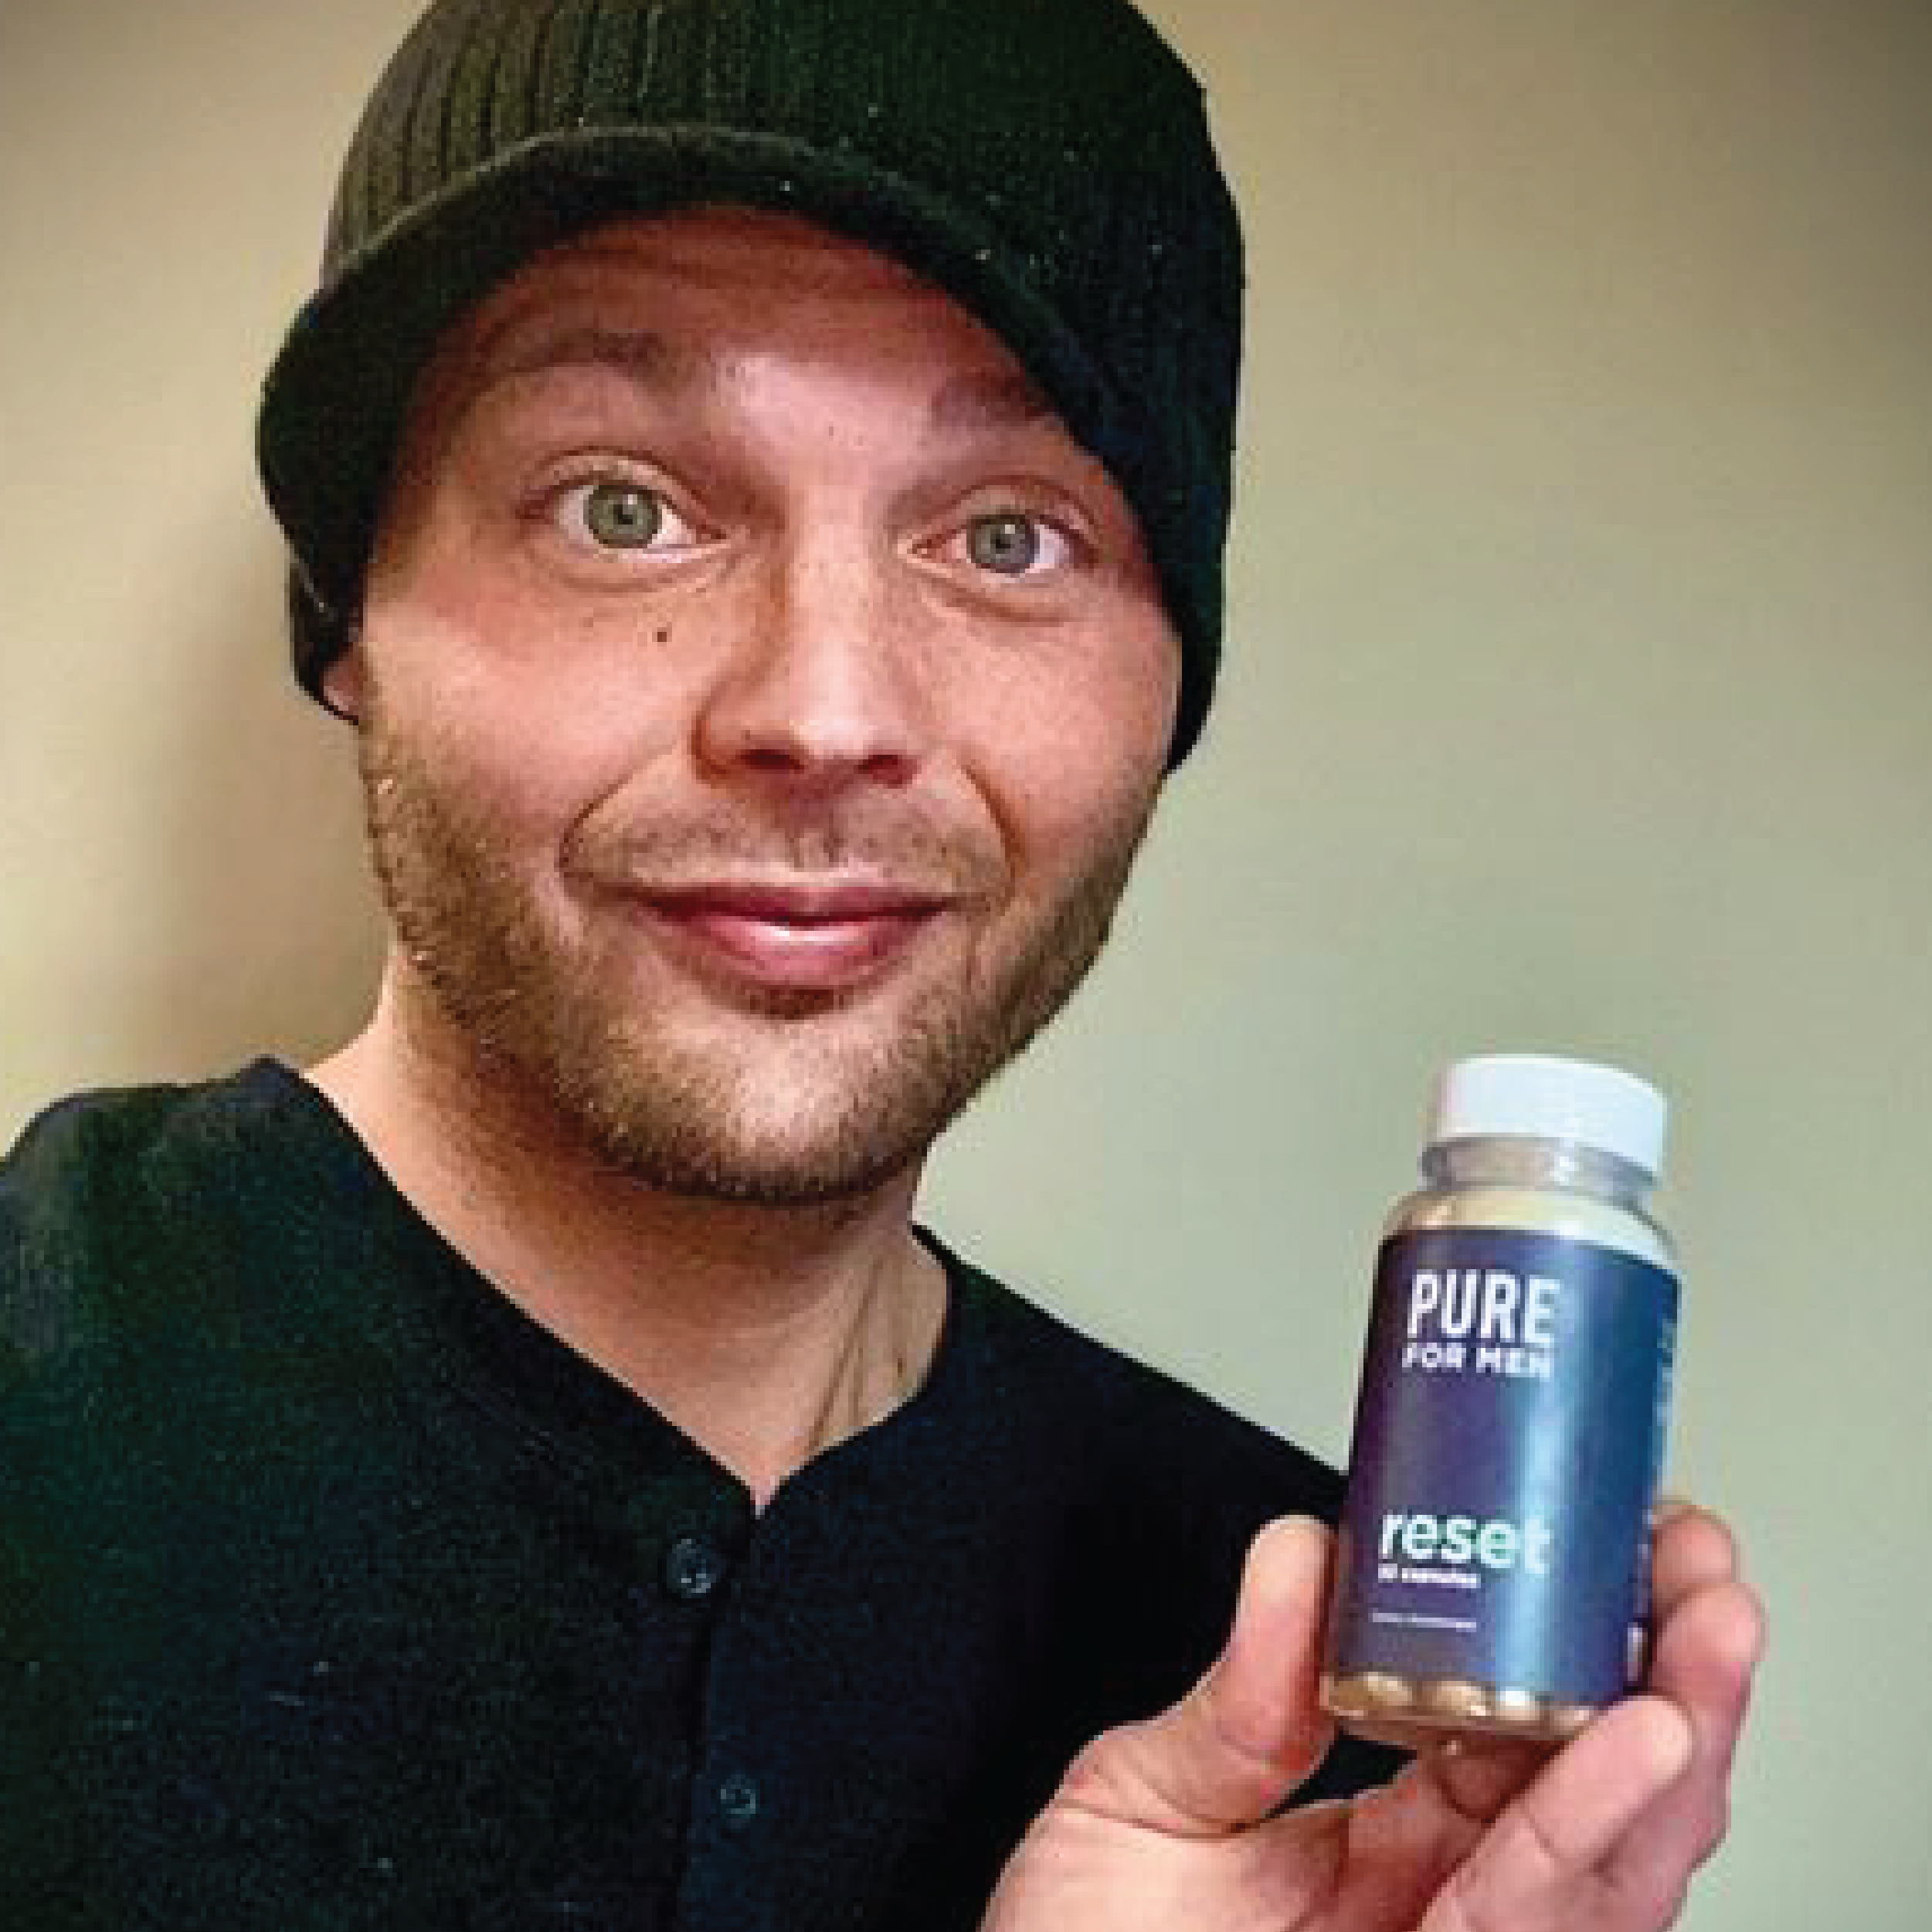 Pure for Men 5-Sterne-Bewertung Kundenmeinung Michael Reset